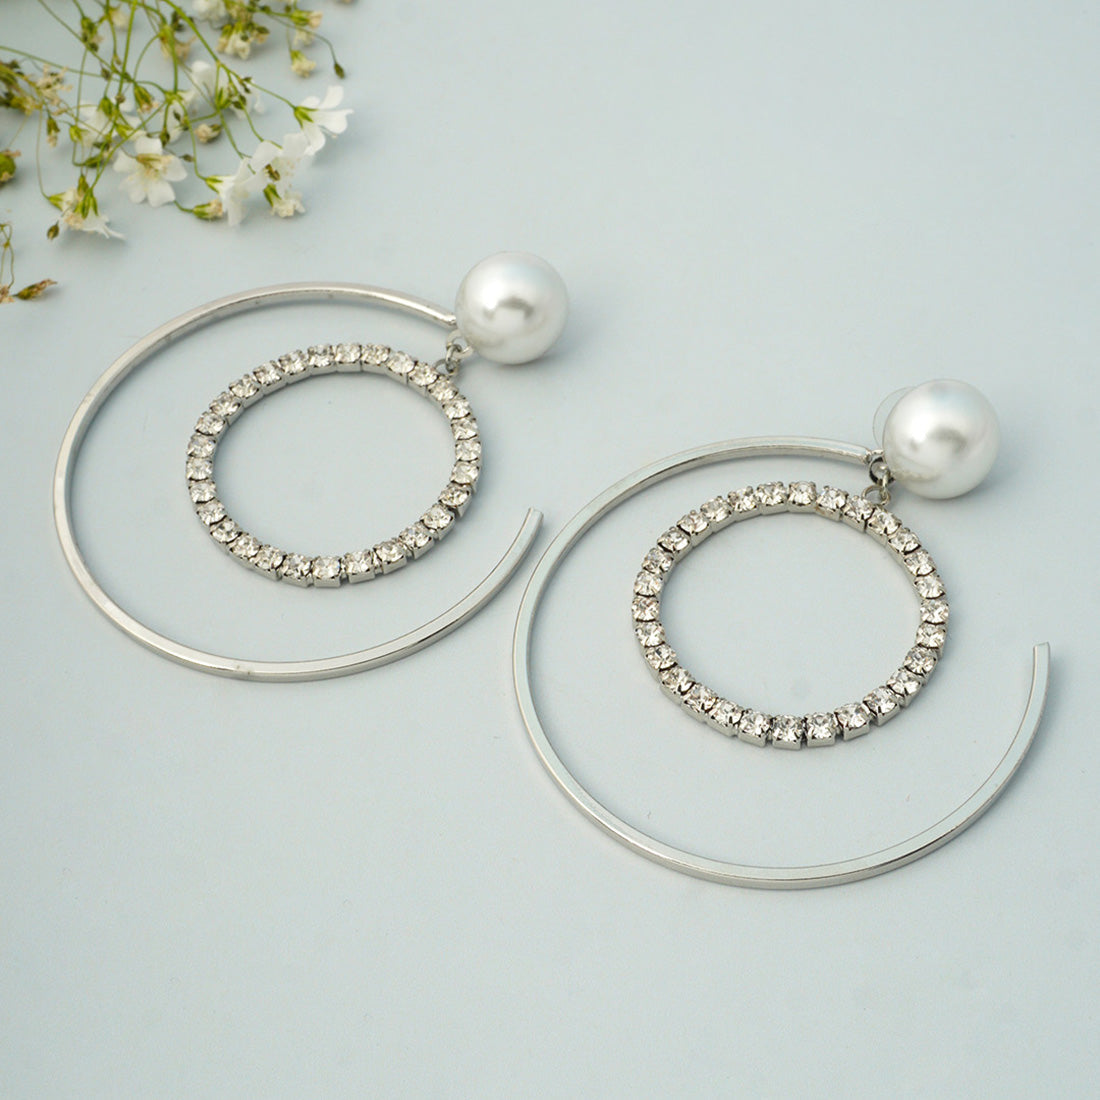 Chic Pearly Crystal Double Ring Earrings